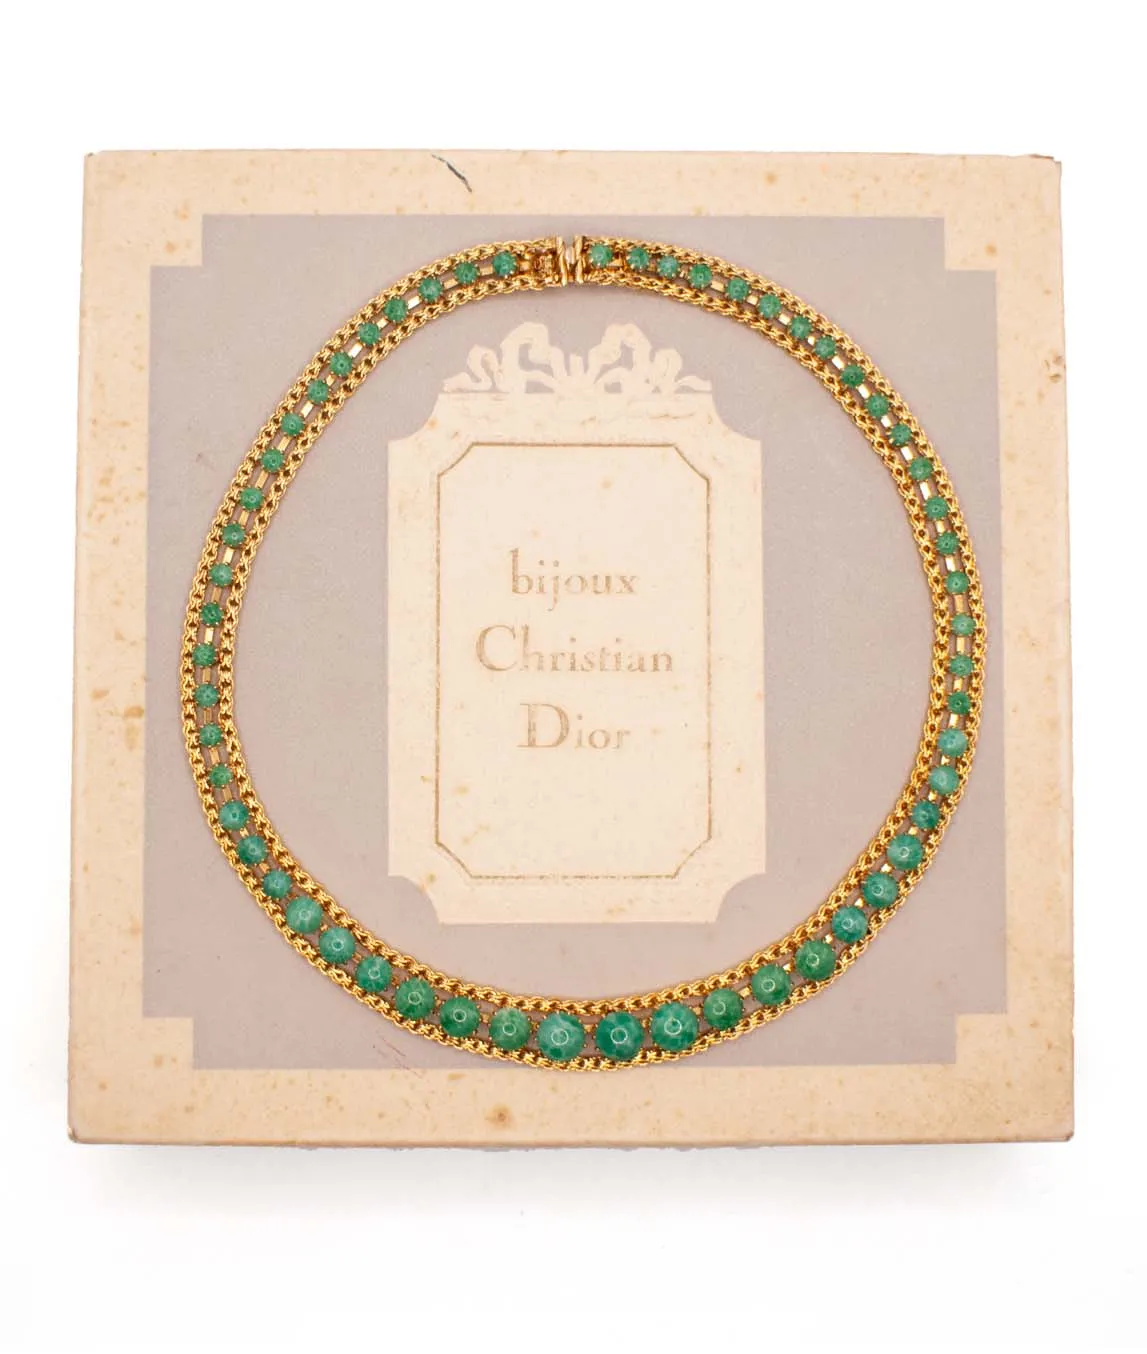 bijoux Christian Dior box with 1965 green stone and gold plated choker necklace